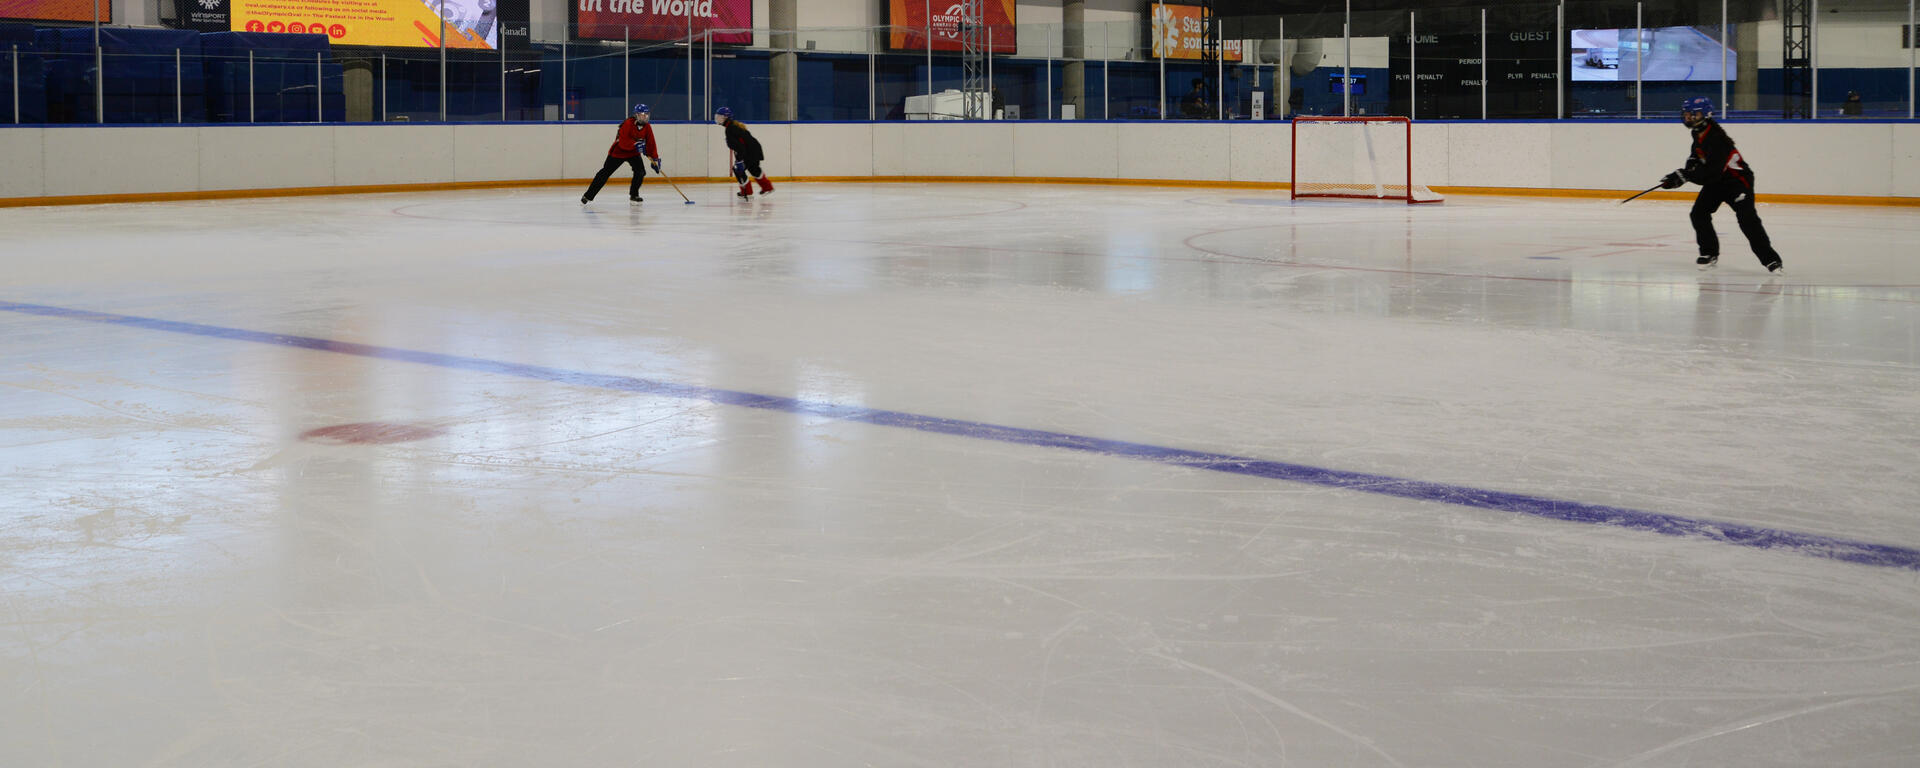 Ringette players performing a drill on-ice